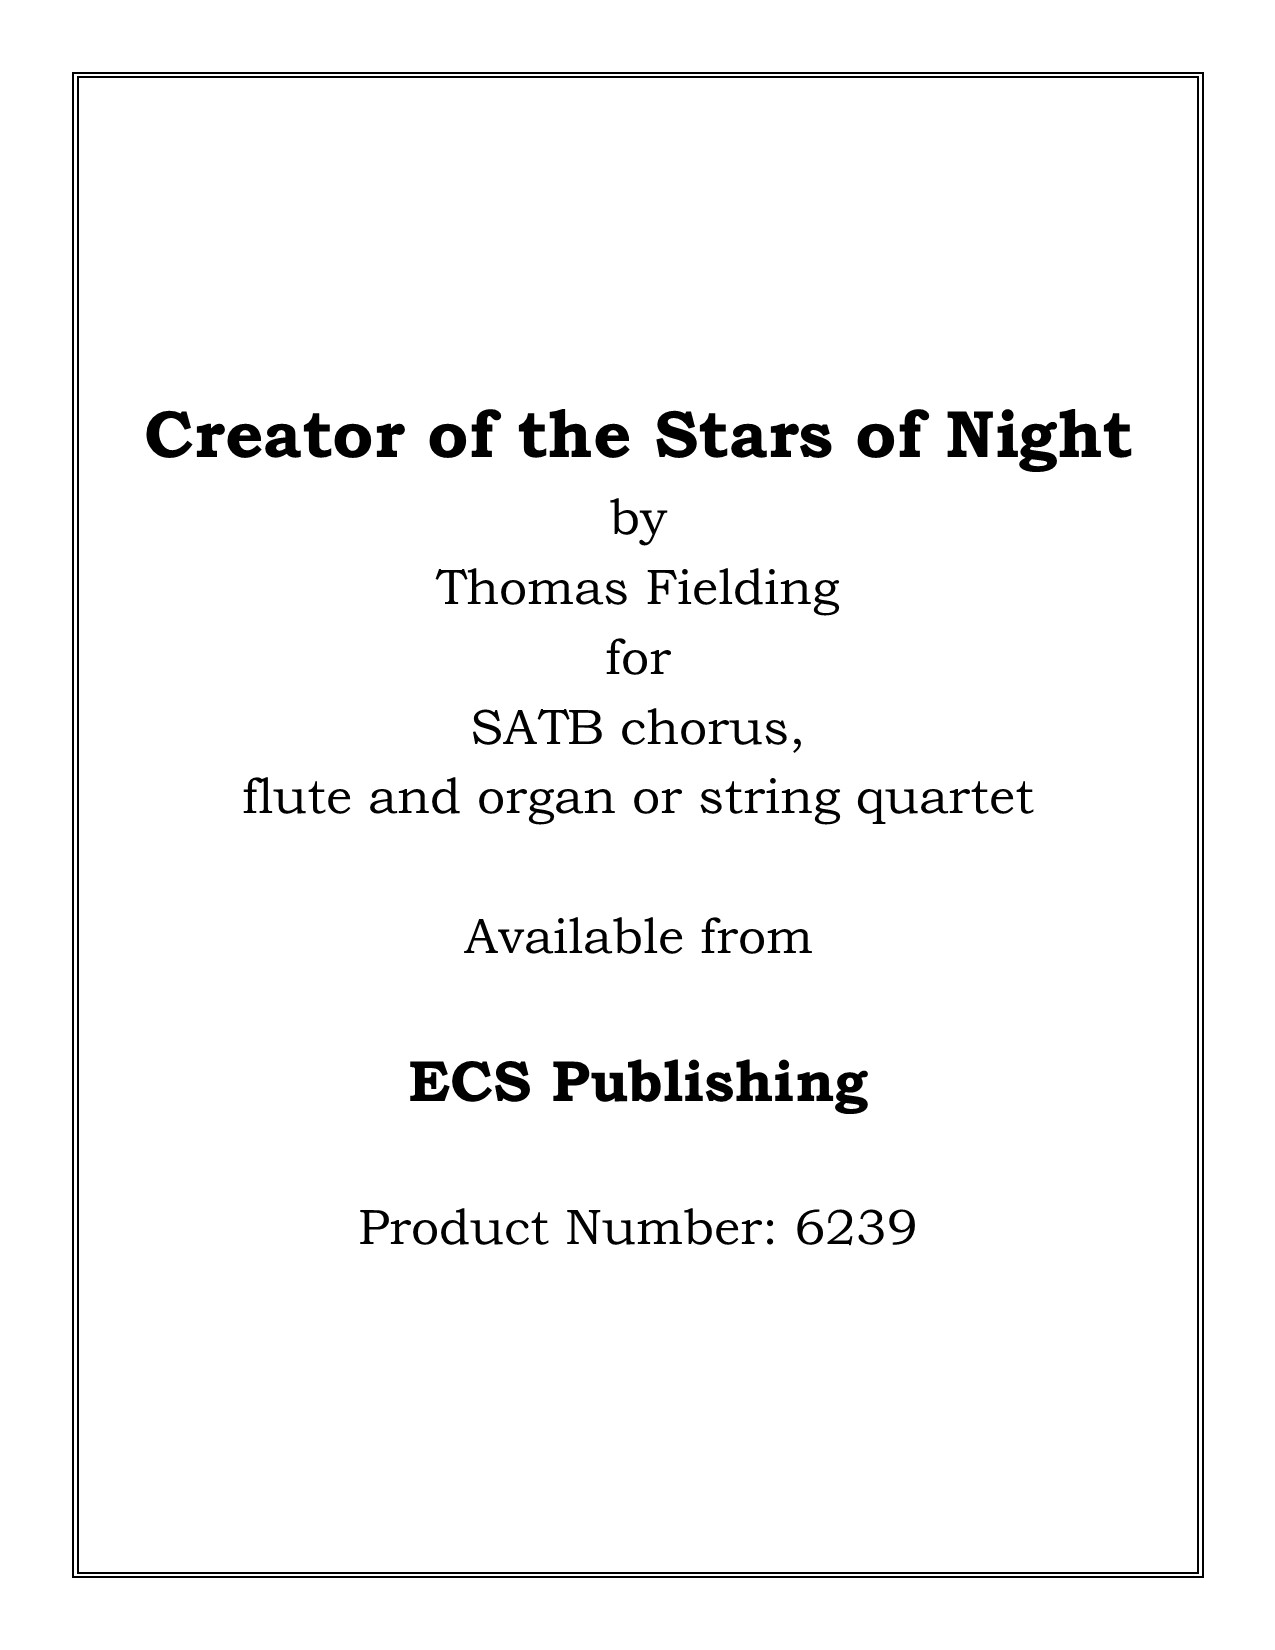 Creator page one